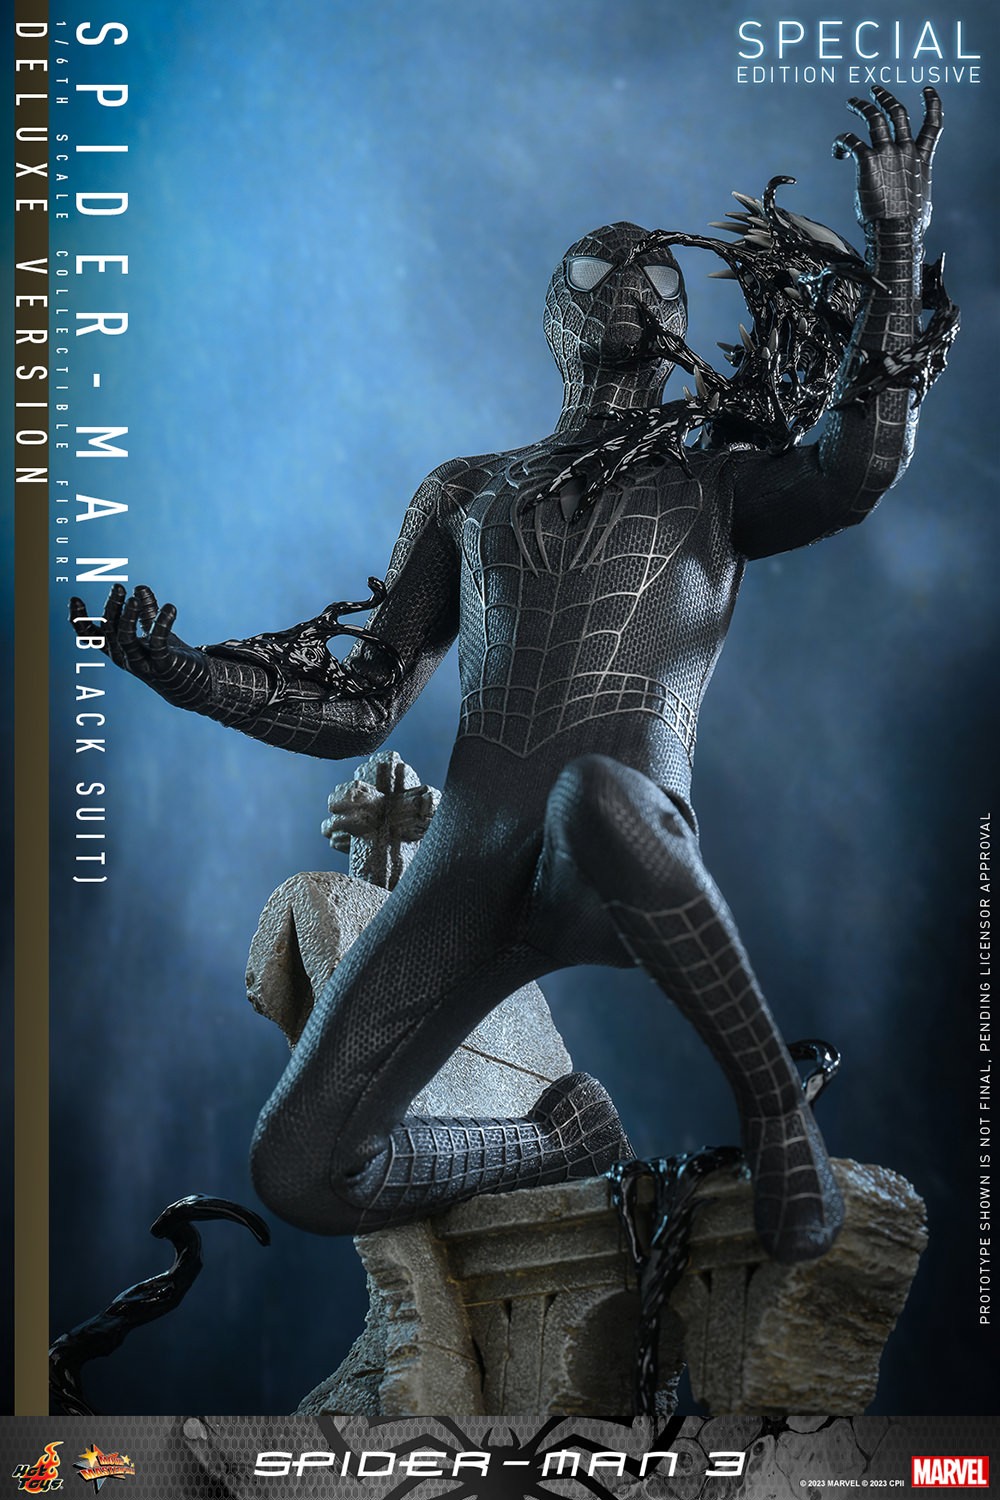 Spider-Man (Black Suit) (Deluxe Version) (Special Edition) (Prototype Shown) View 3